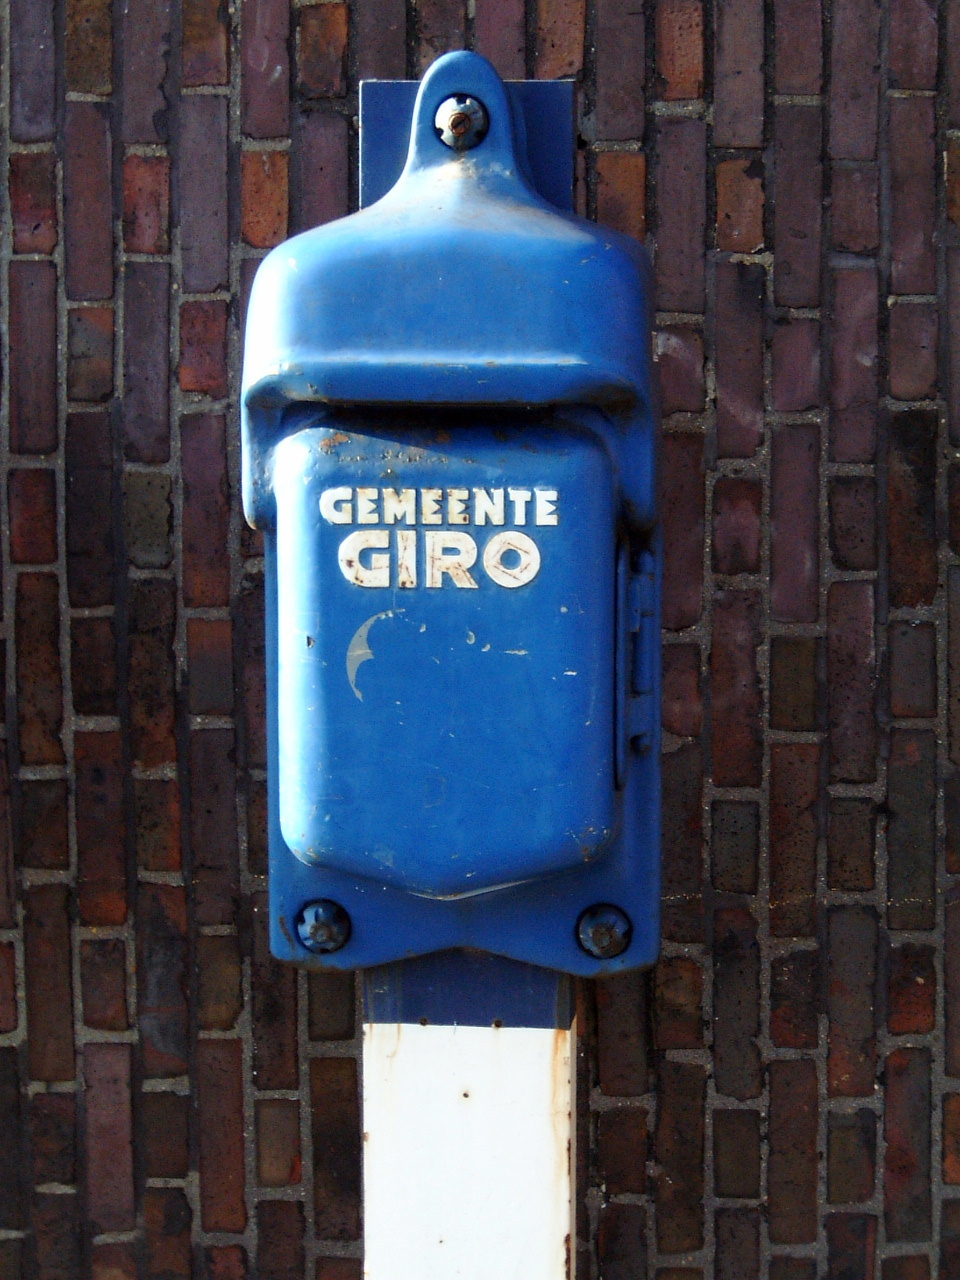 maartent gemeente giro no idea whatsoever what this is metal blue box on brick wall